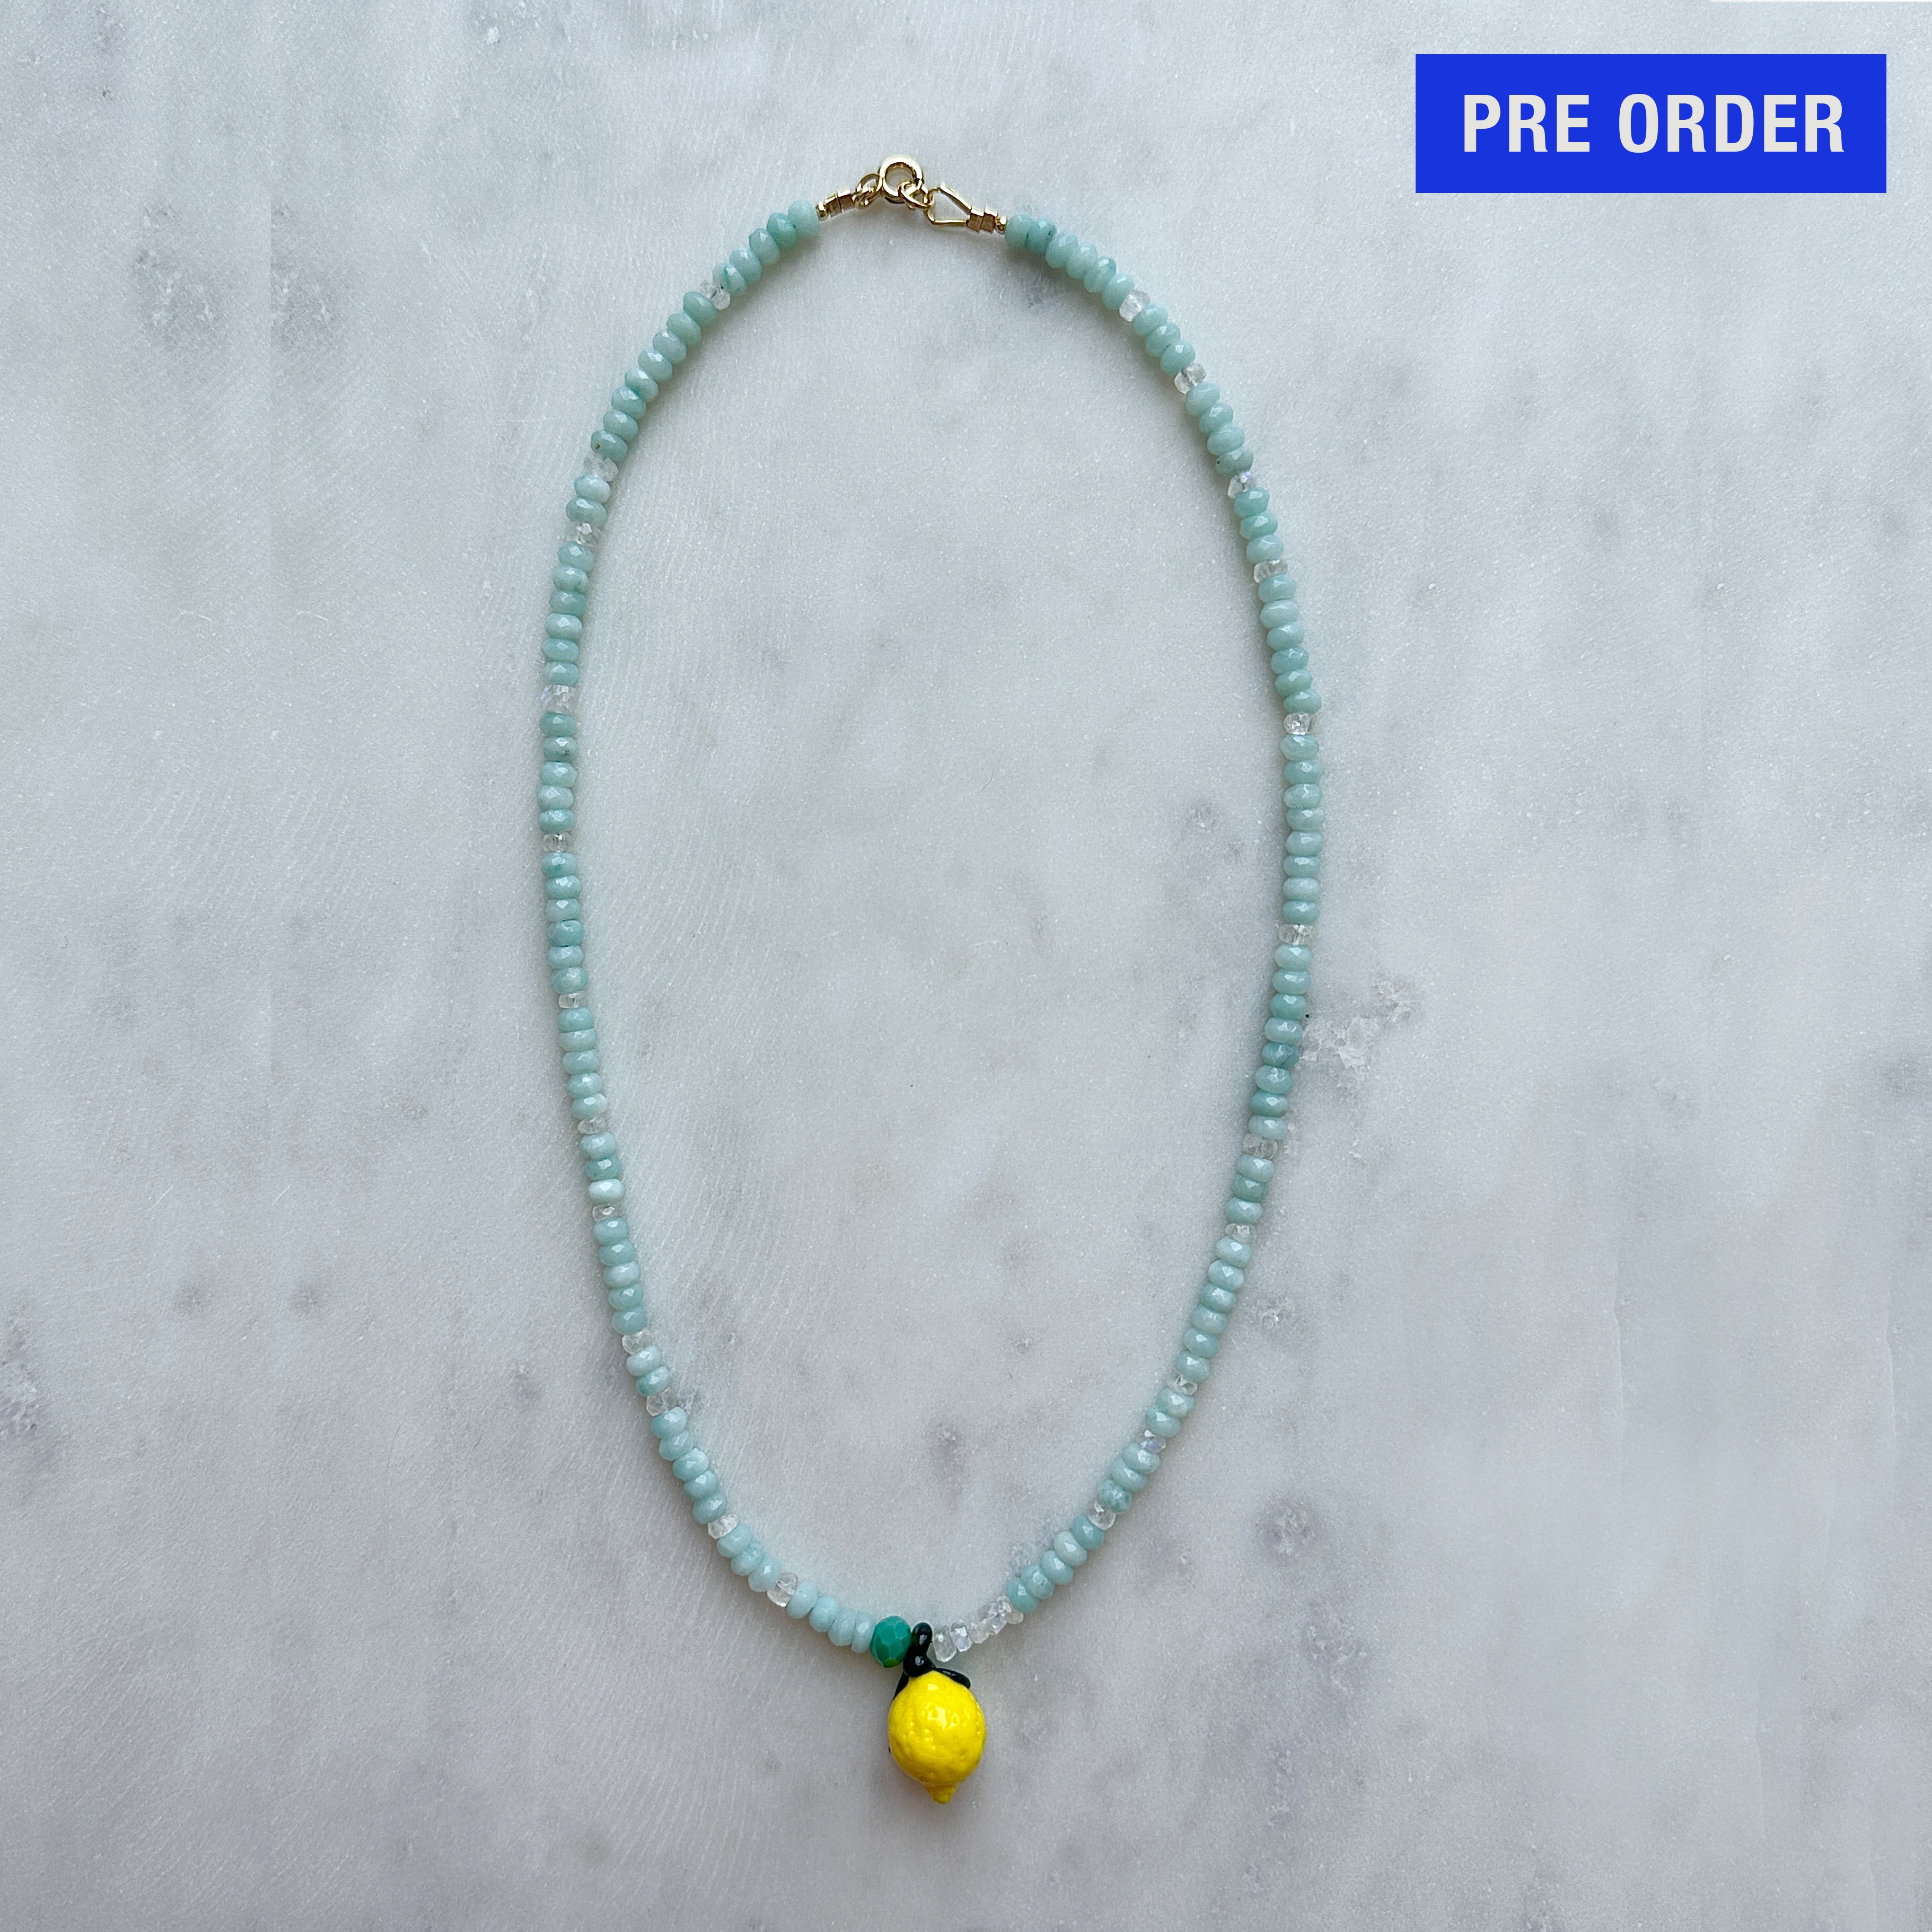 PRE-ORDER - When Life Gives You Lemon Necklace